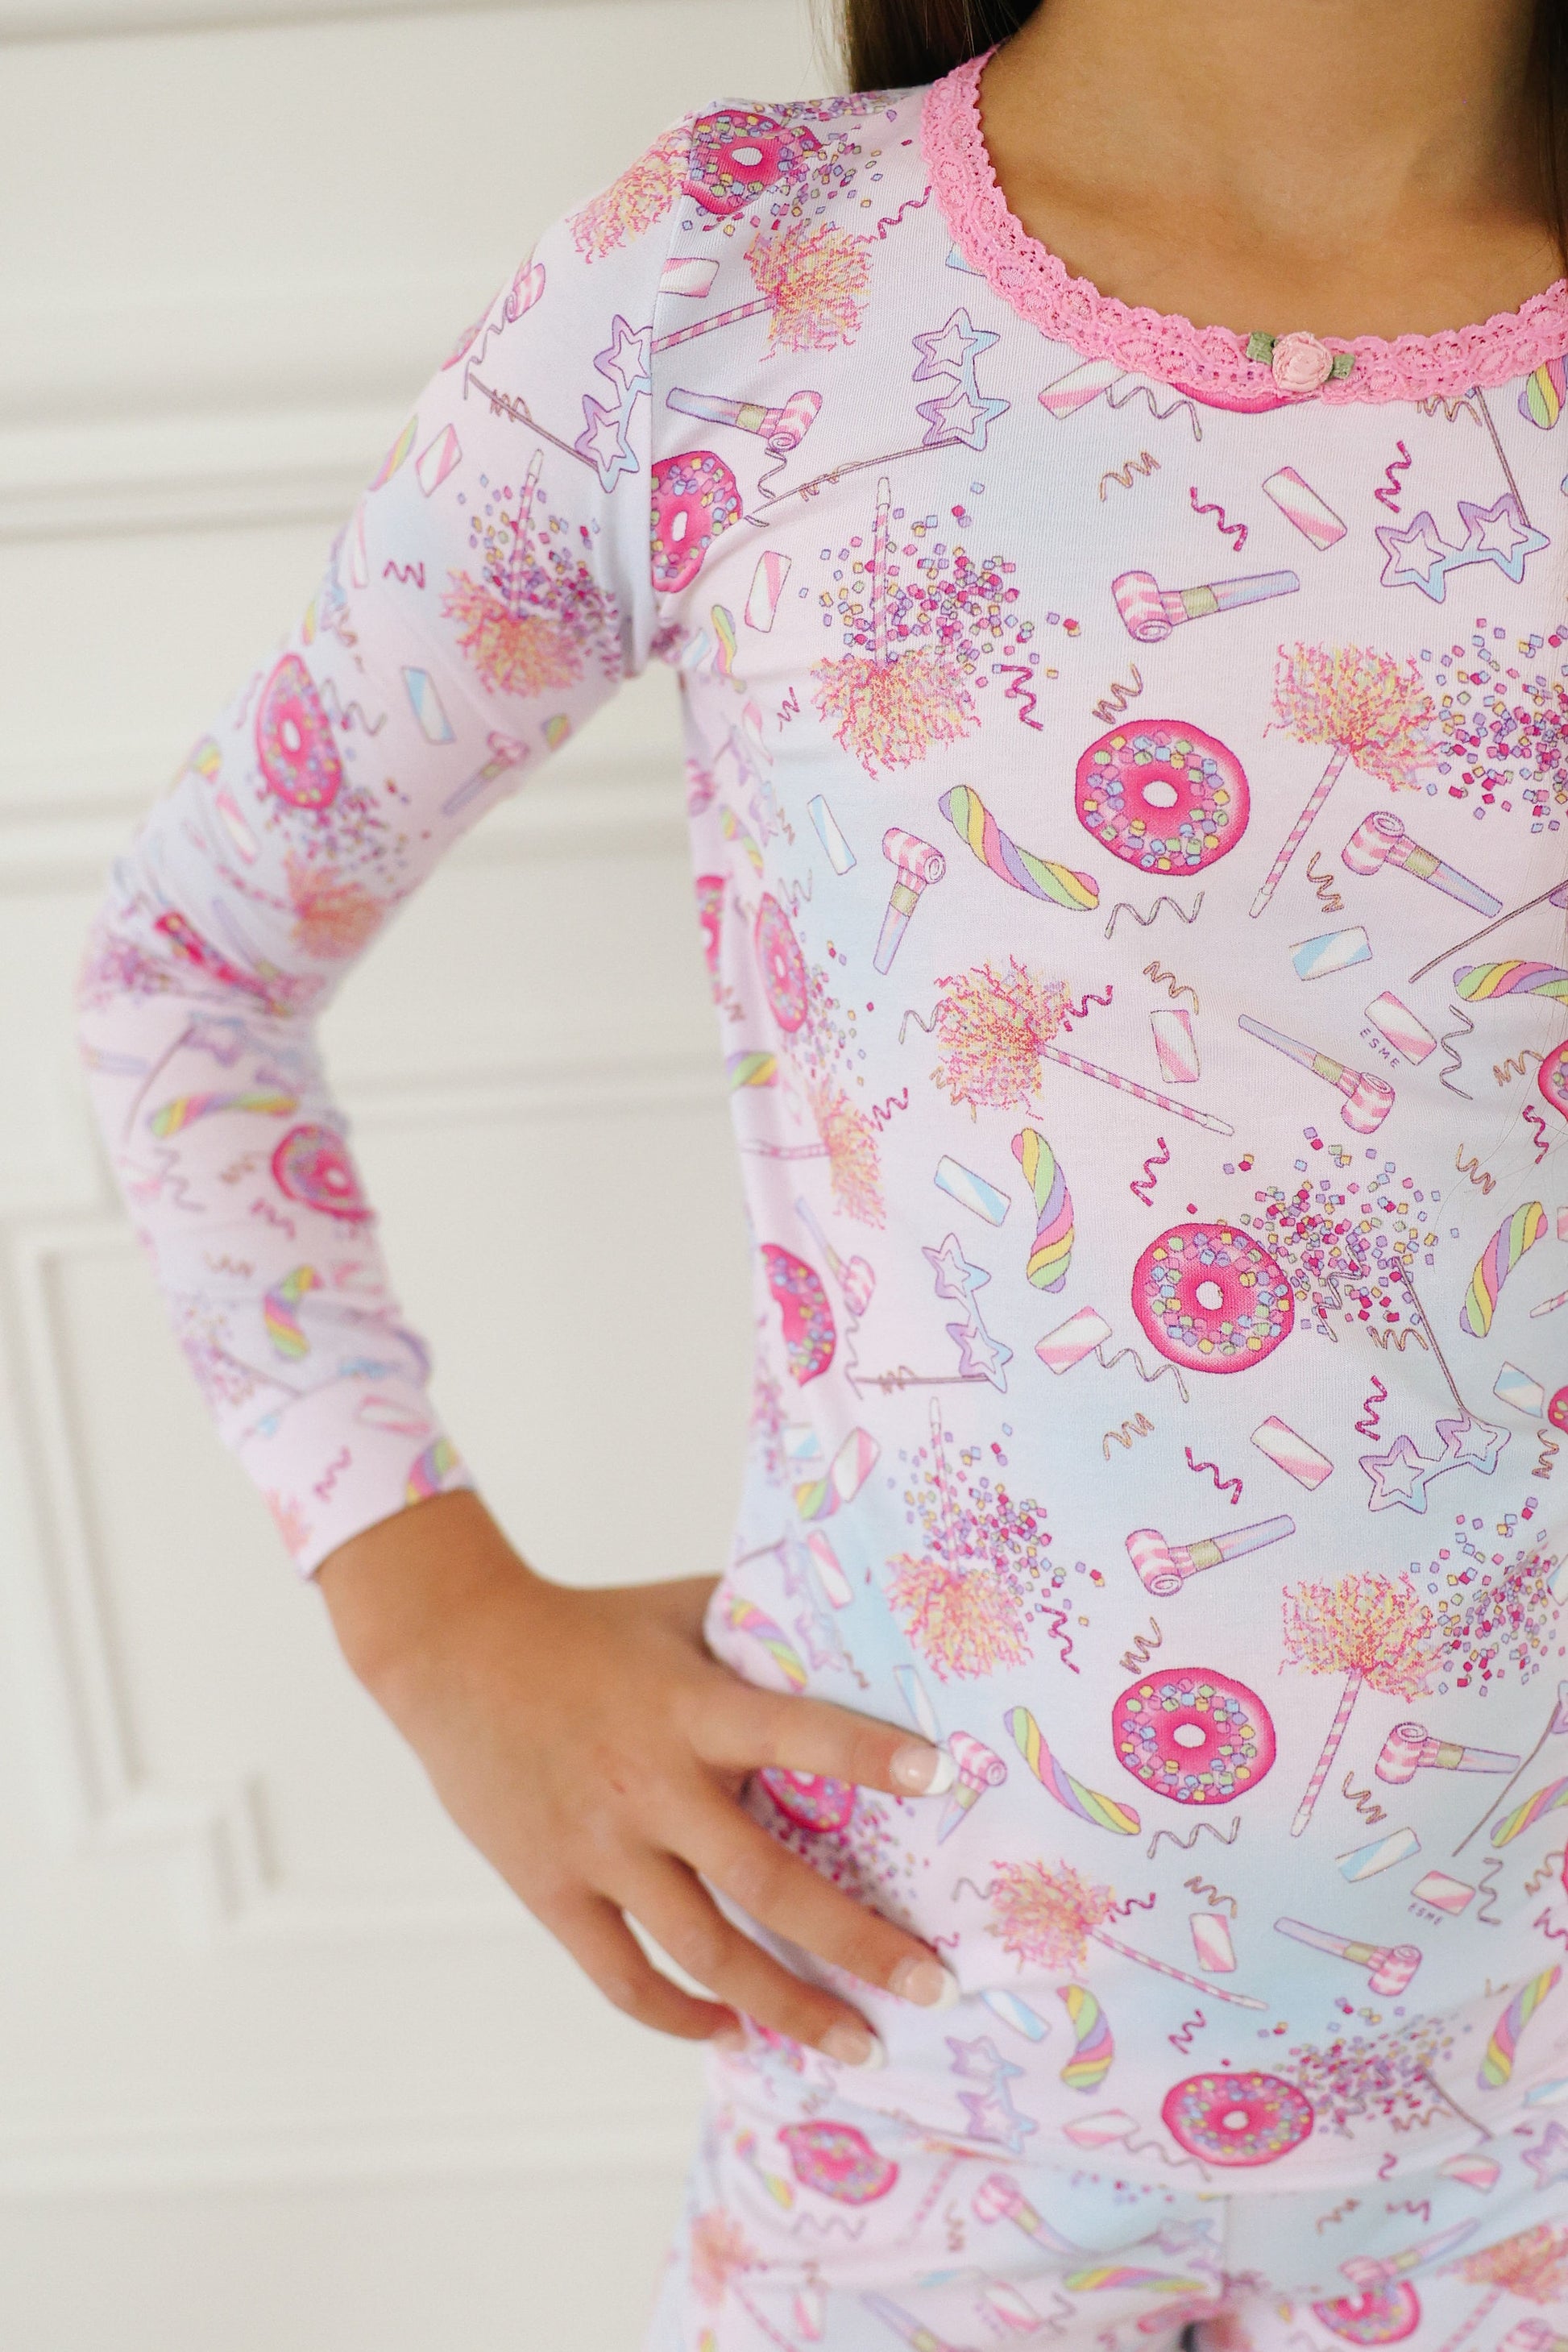 Esme girls long sleeve pajamas in pink. Design is festive, confetti and donuts